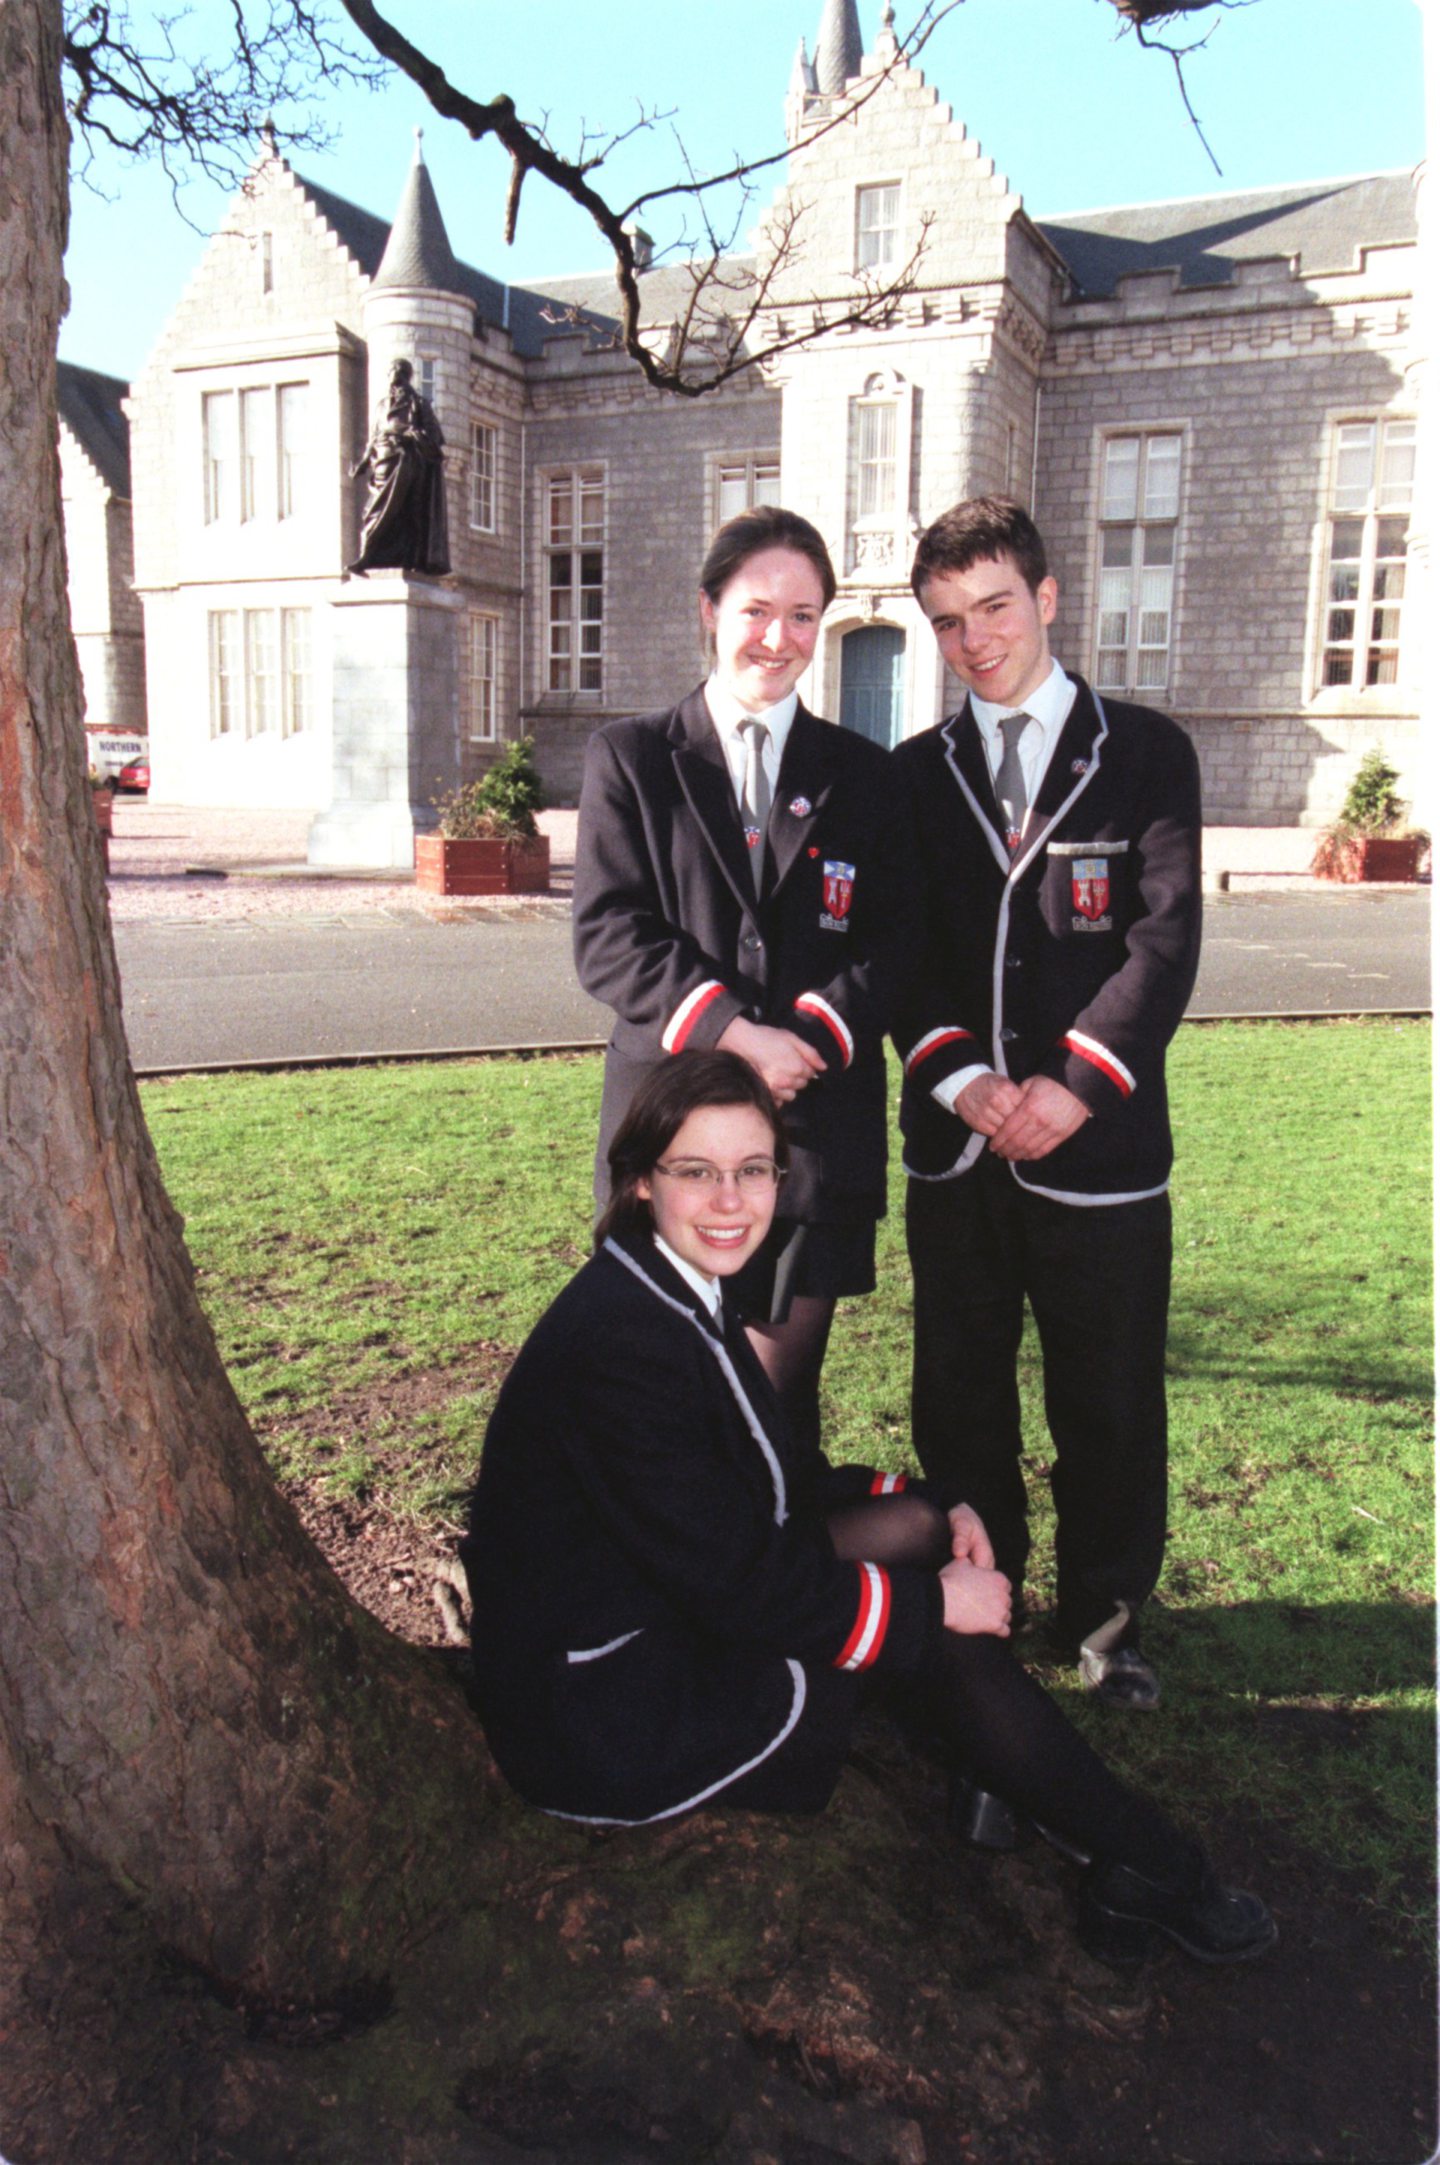 Head girl with two fellow pupils who were to take part in the Oxford Union Schools' Debating competition in 1999.